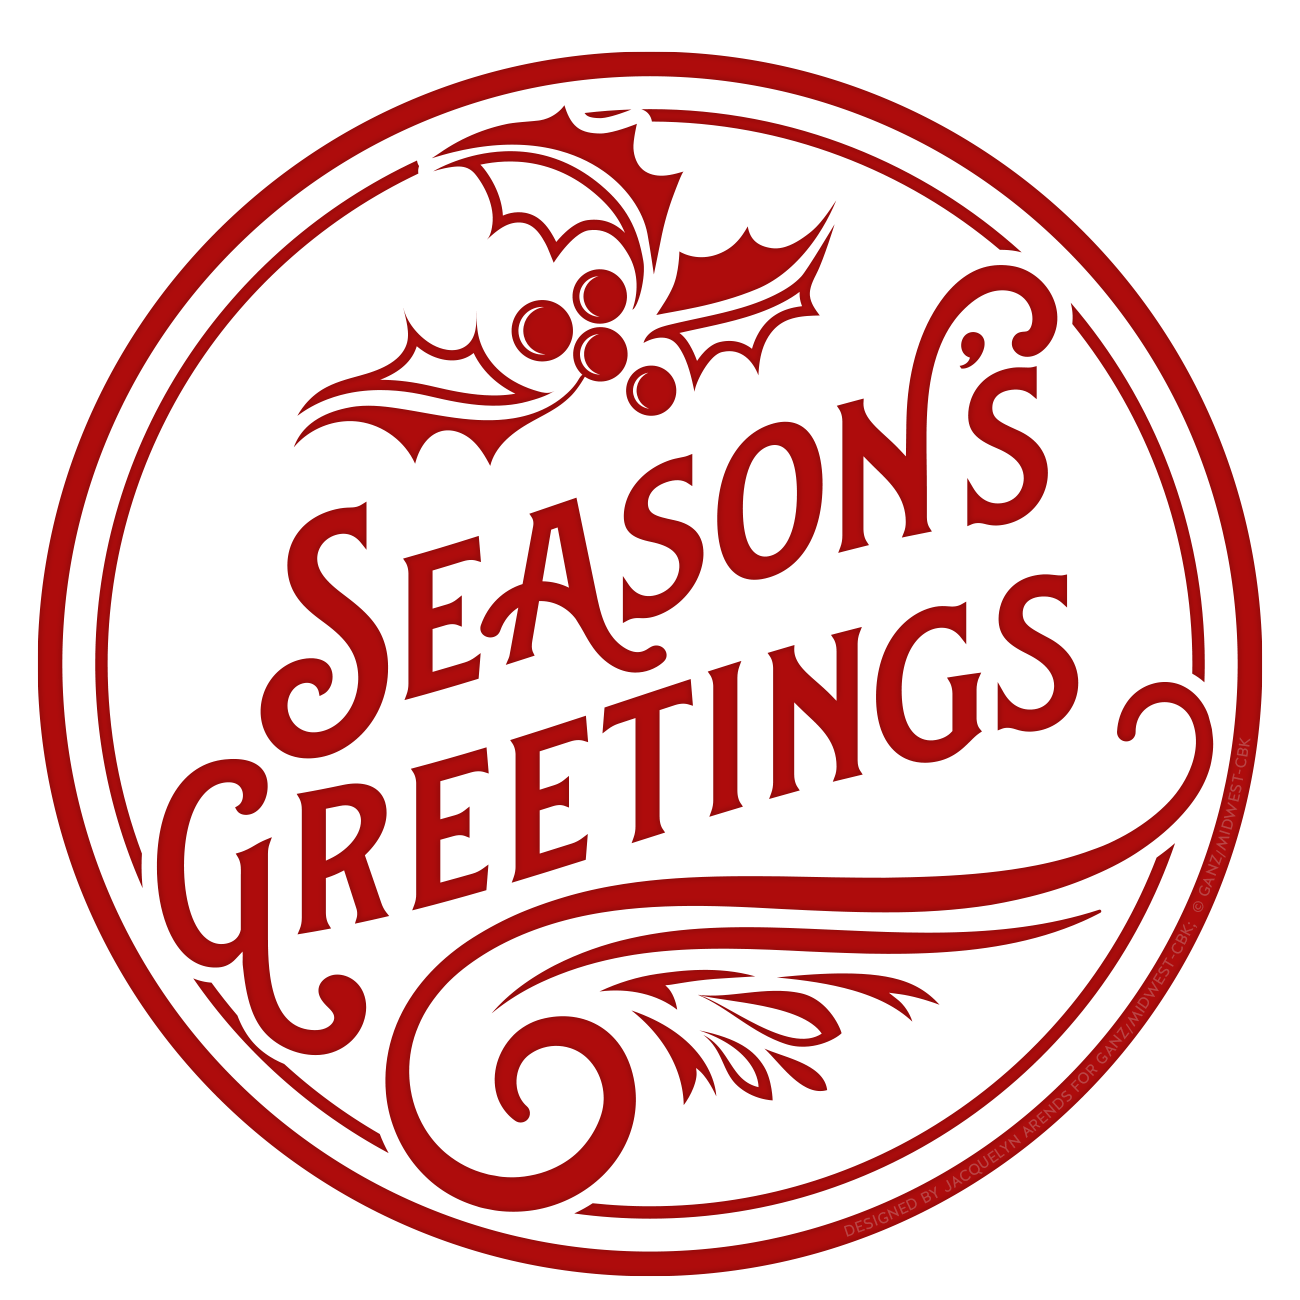 Season's Greetings icon designed by Jacquelyn Arends; © Ganz/Midwest-CBK